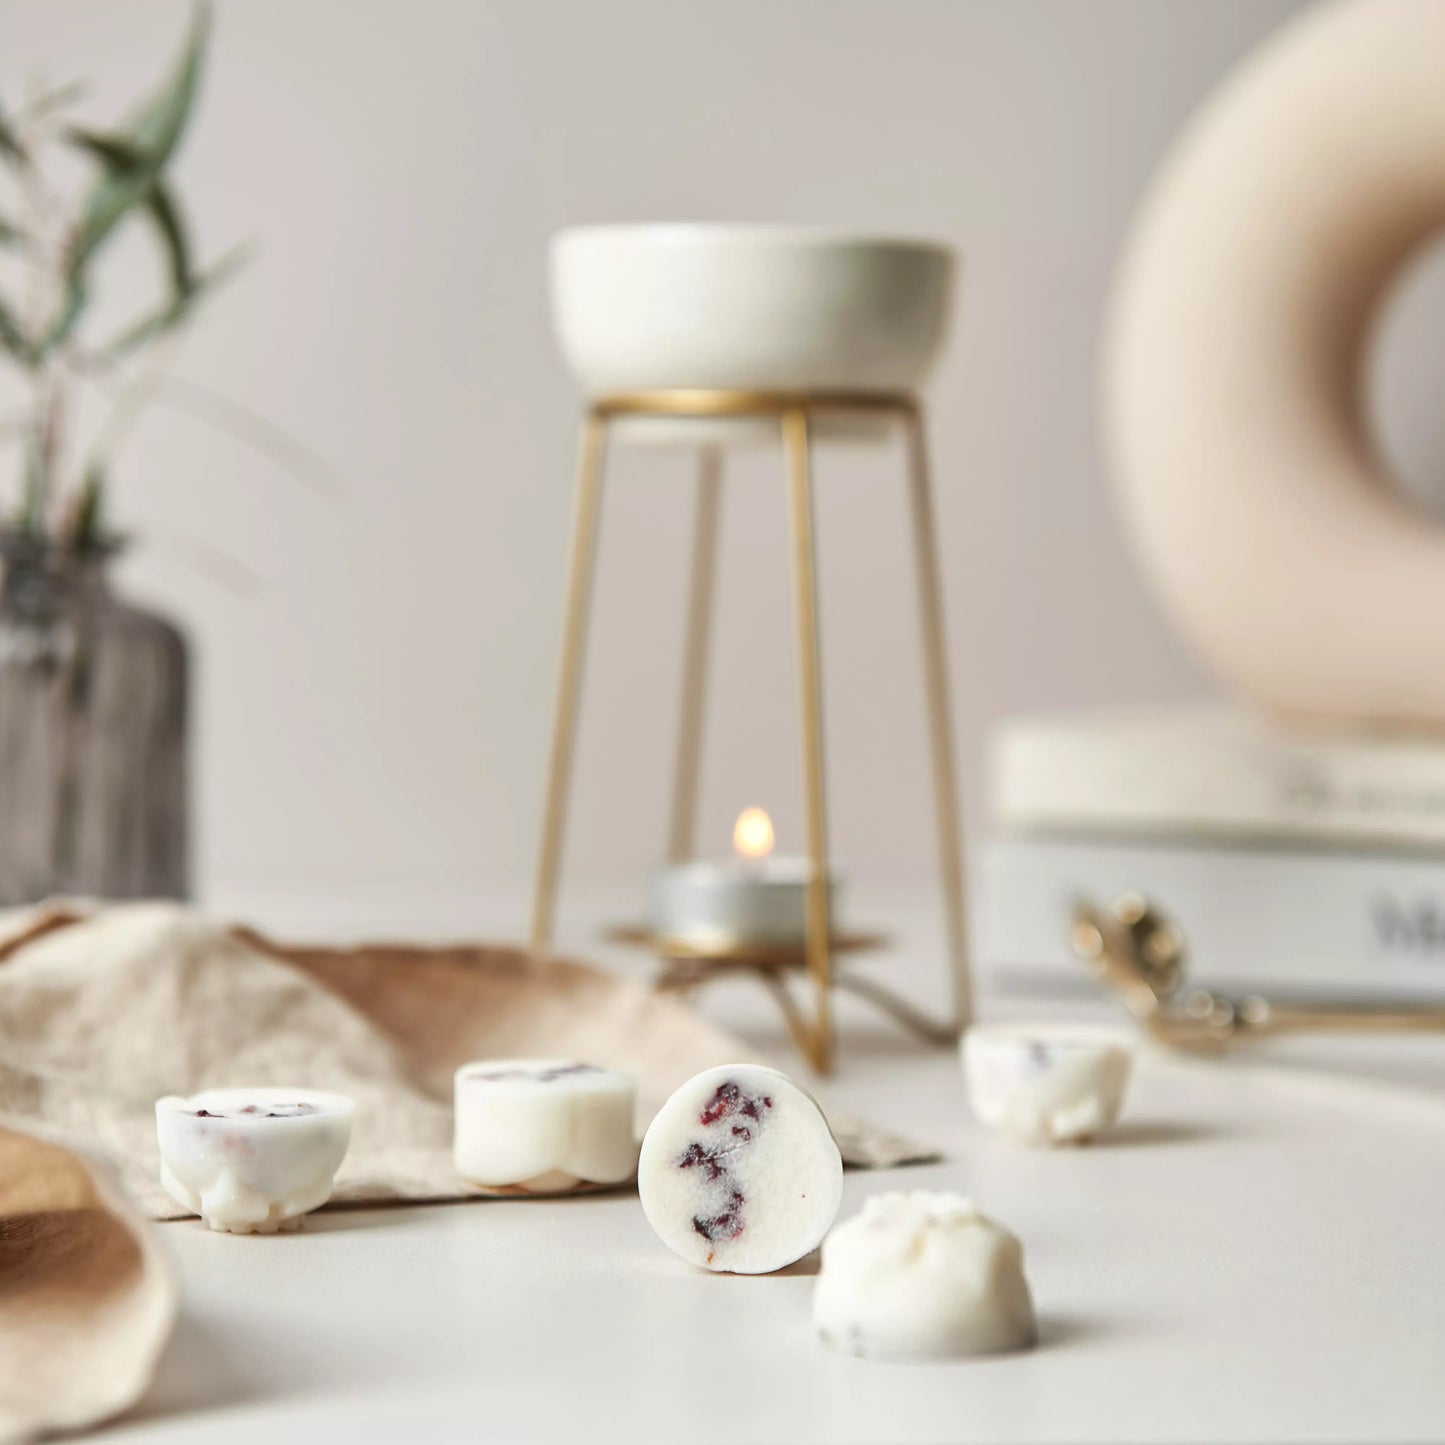 Our Marine and Rose Wax Melts are loosely scattered with a bronze wax warmer and a tea light in the background.